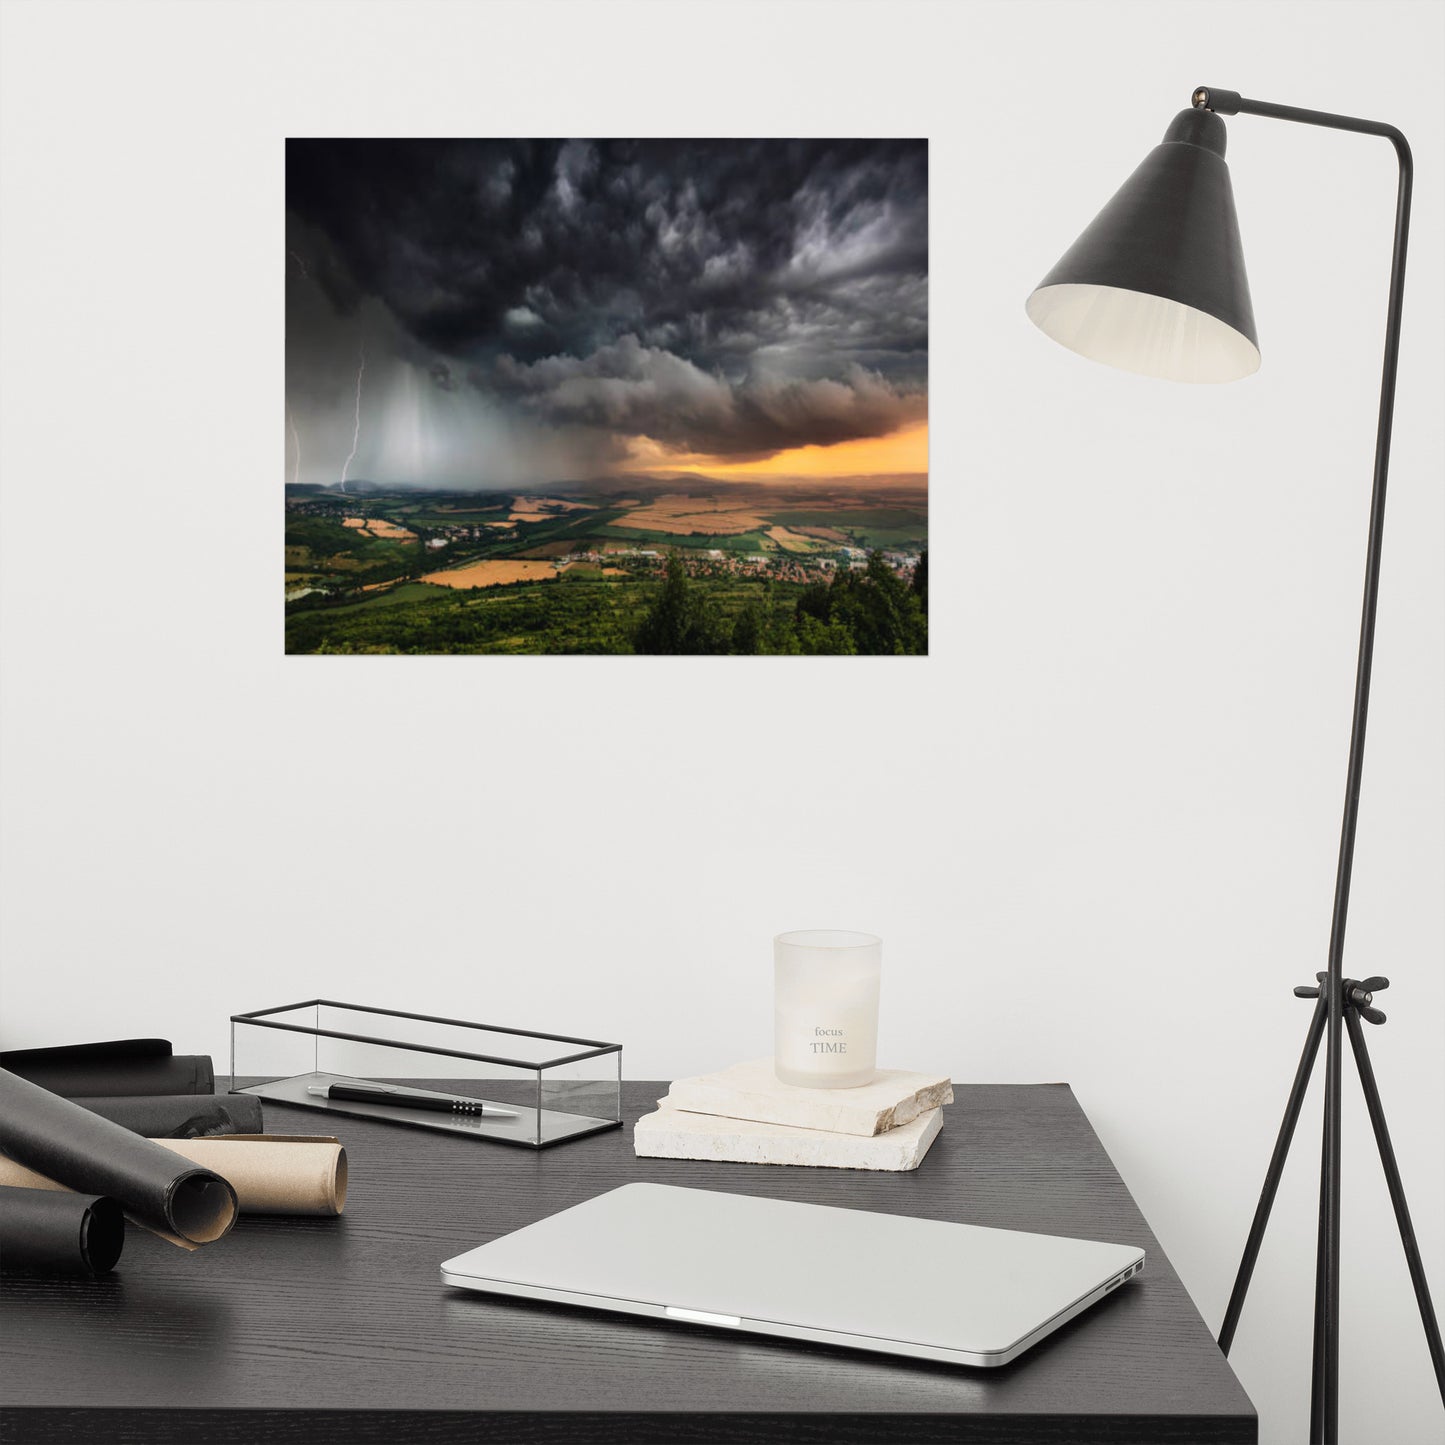 The Storm Rustic Landscape Photograph Loose Unframed Wall Art Print